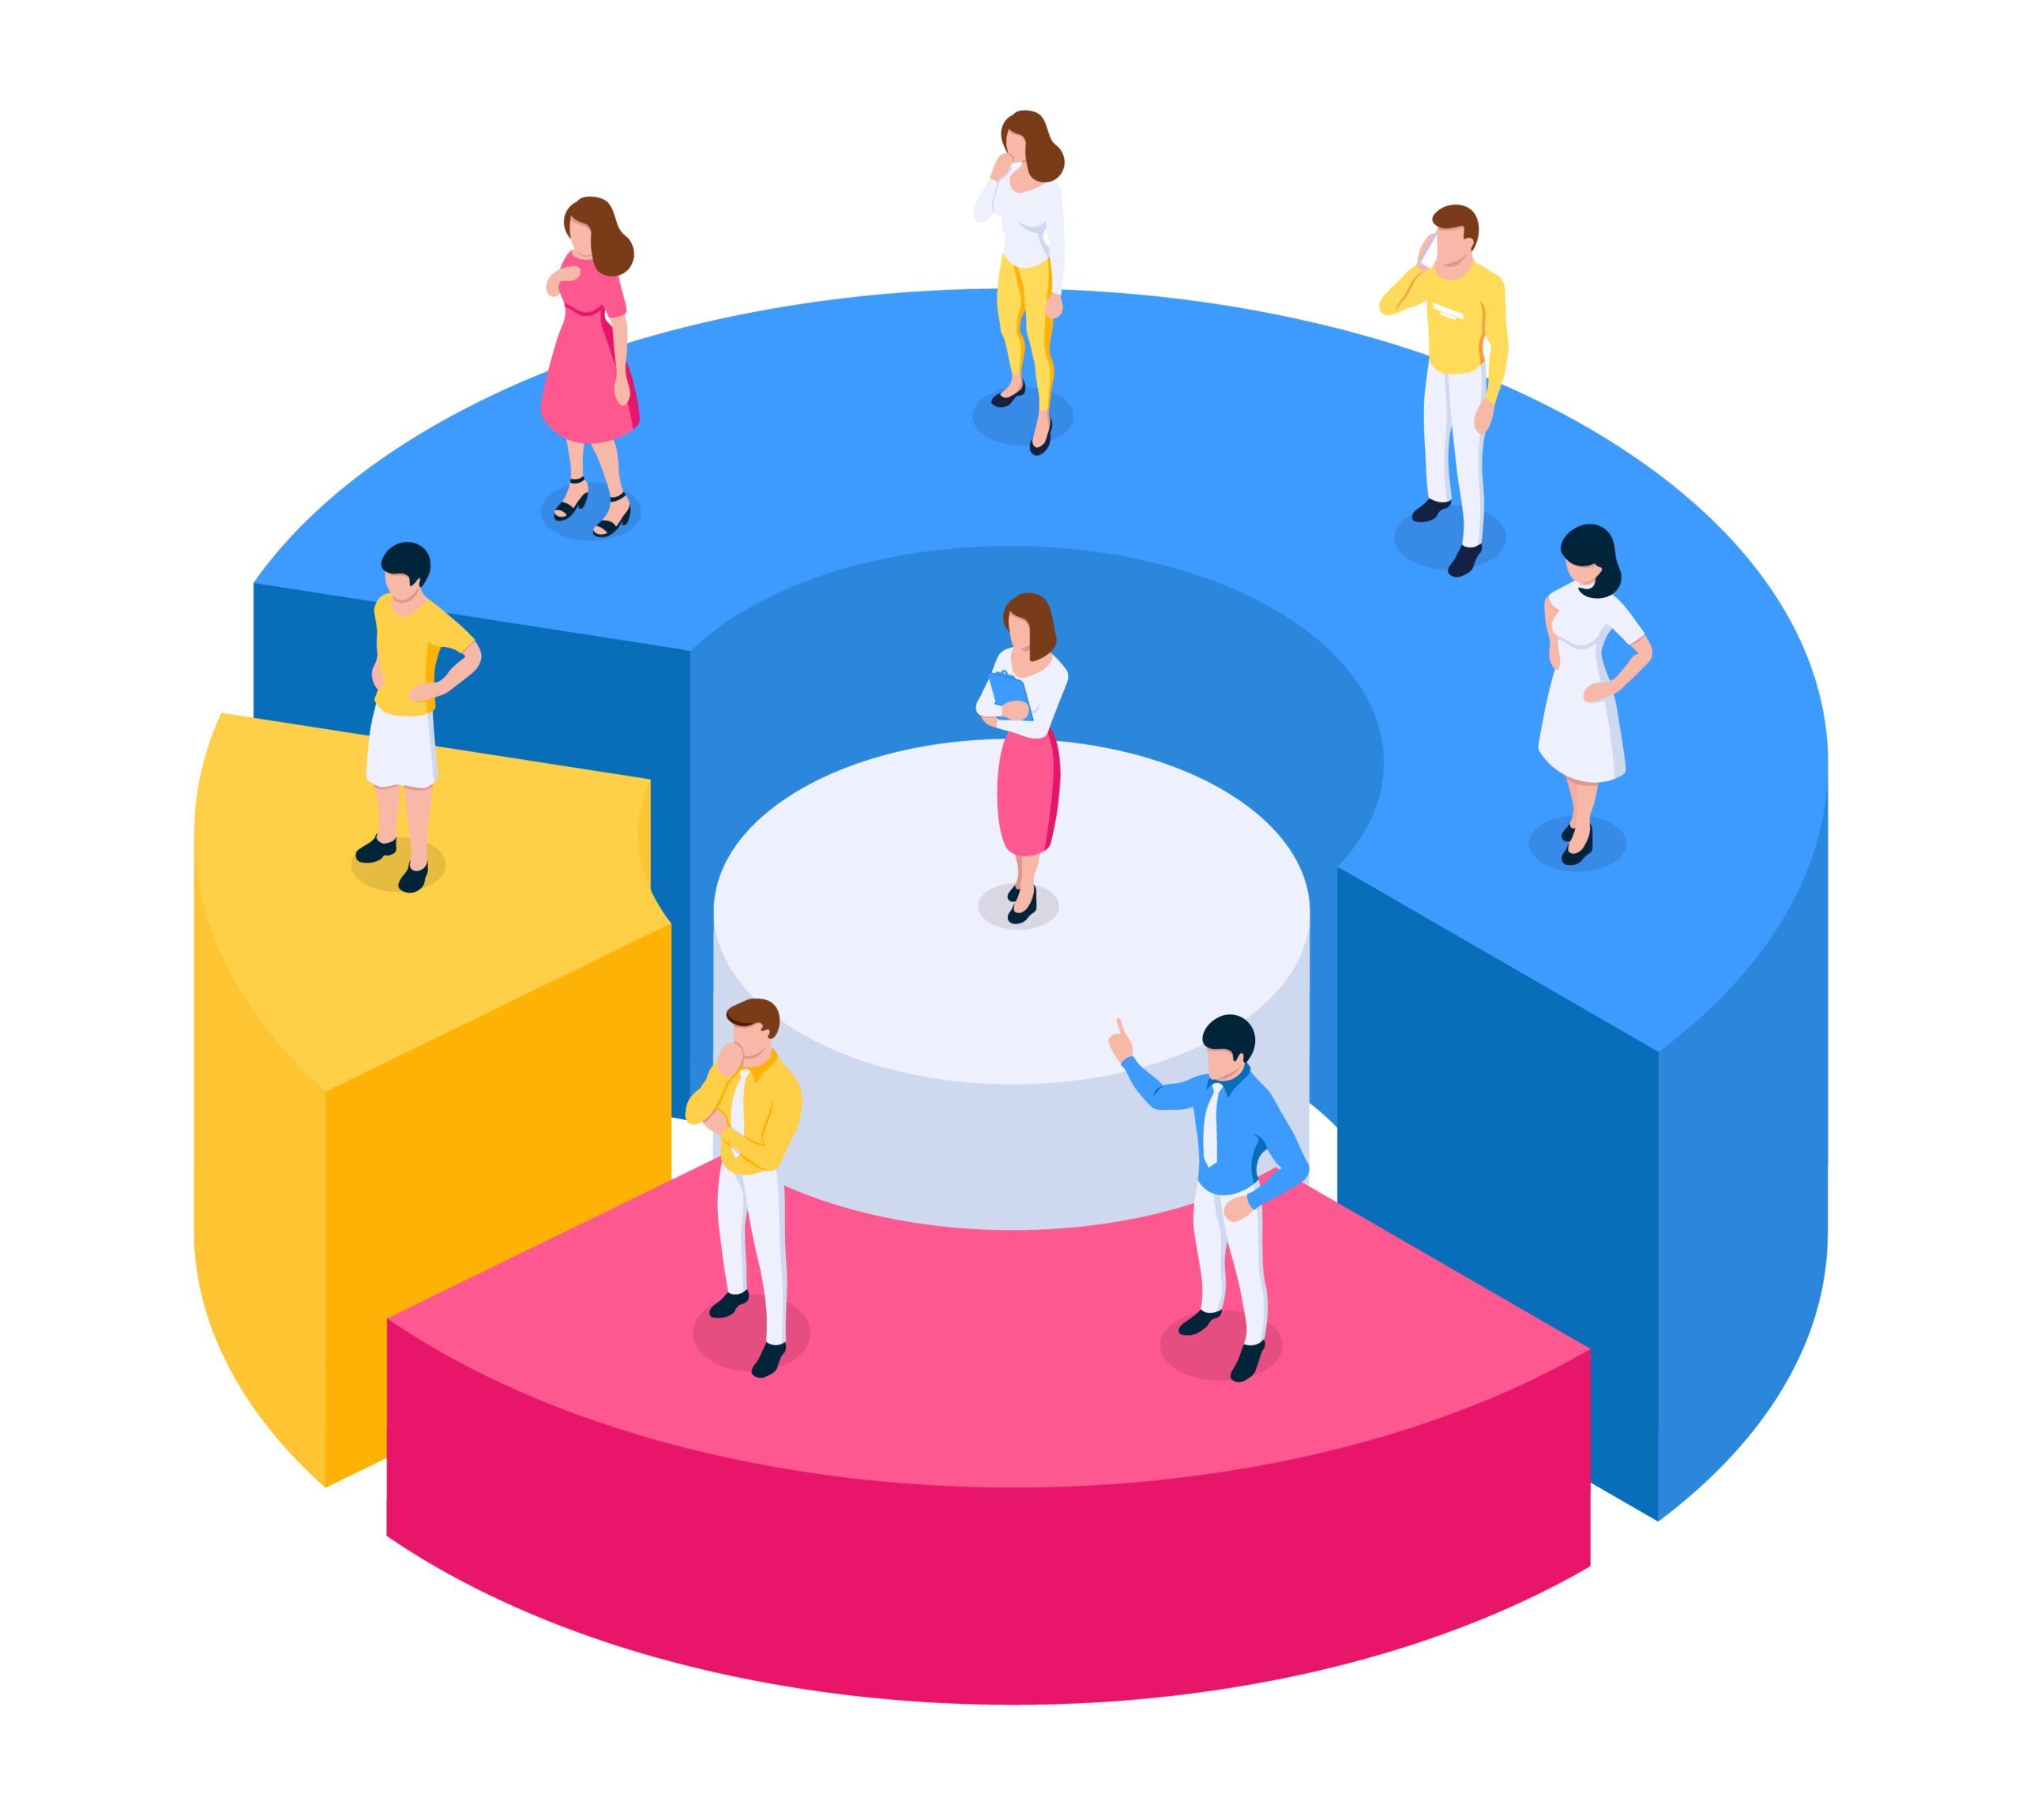 Audience segmentation concept. Dividing your target audience. Isometric illustration on white background.